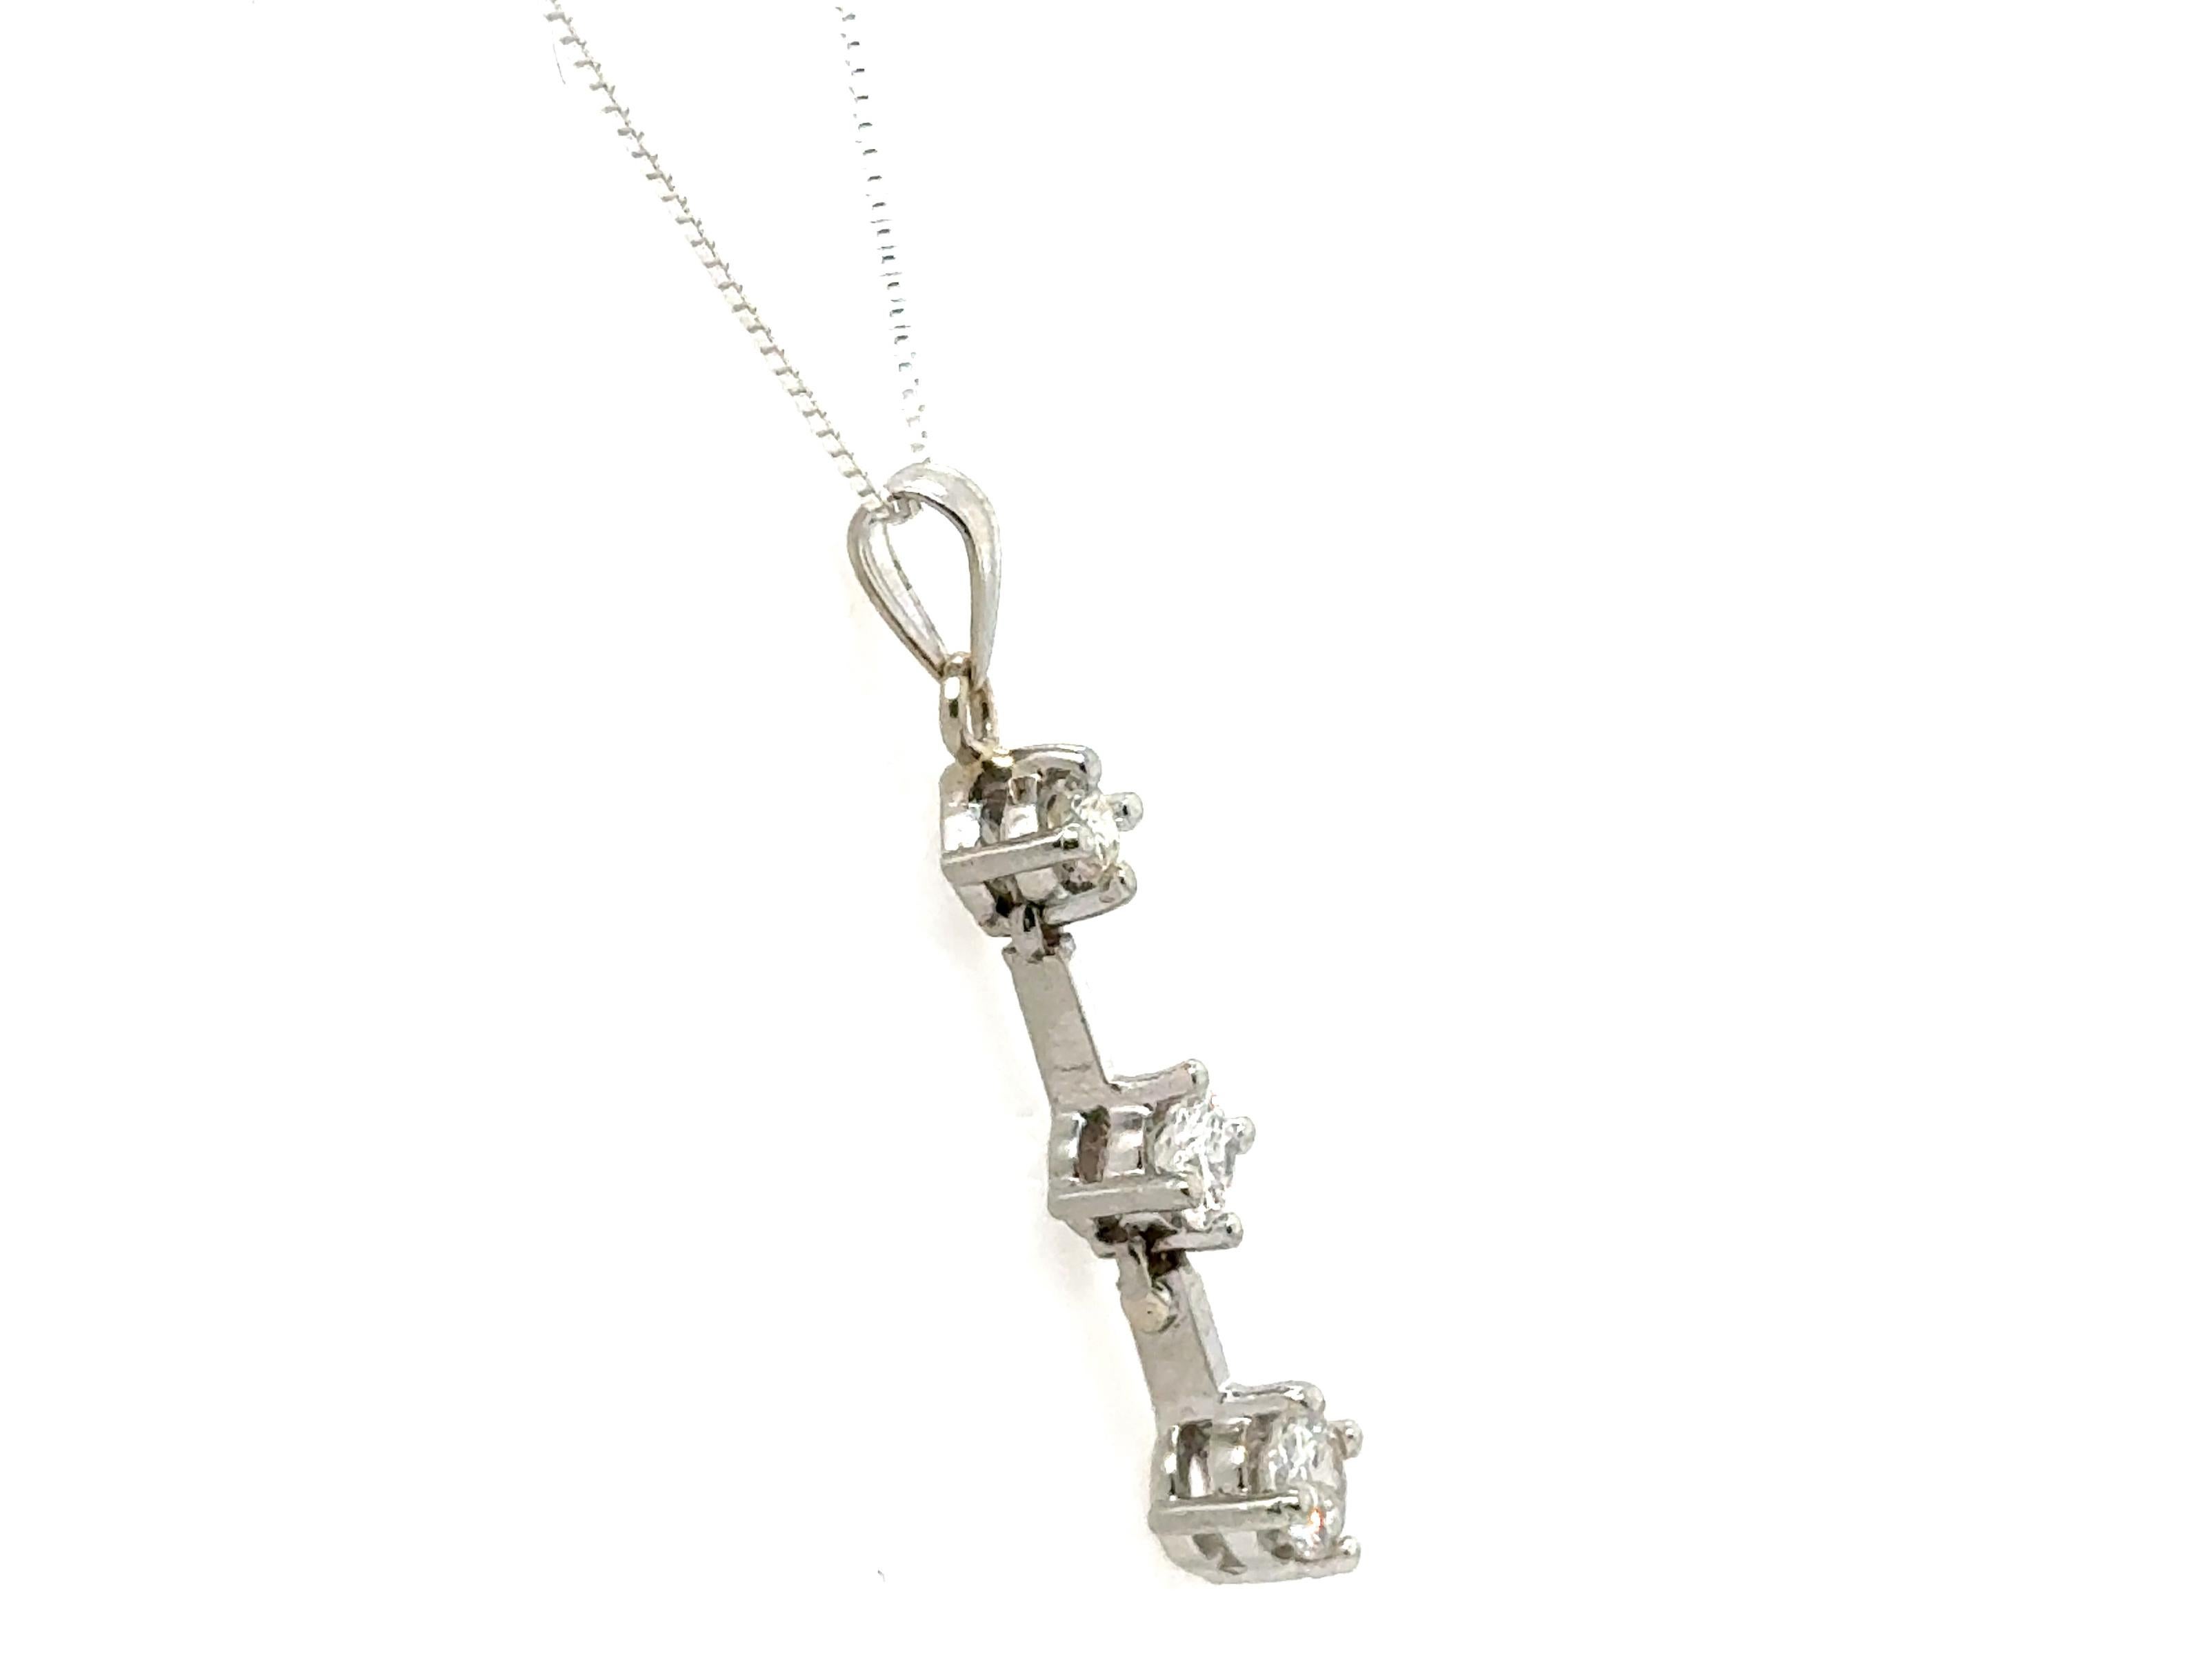 Diamond 3 Stone Journey Pendant Anniversary .80ct Necklace 14K White Gold


Features 3 Genuine Natural Mined Round Brilliant Cut Diamonds

Past, Present, and Future Journey Style Pendant

Classic Journey Design

Never Goes Out of Style

100% Natural